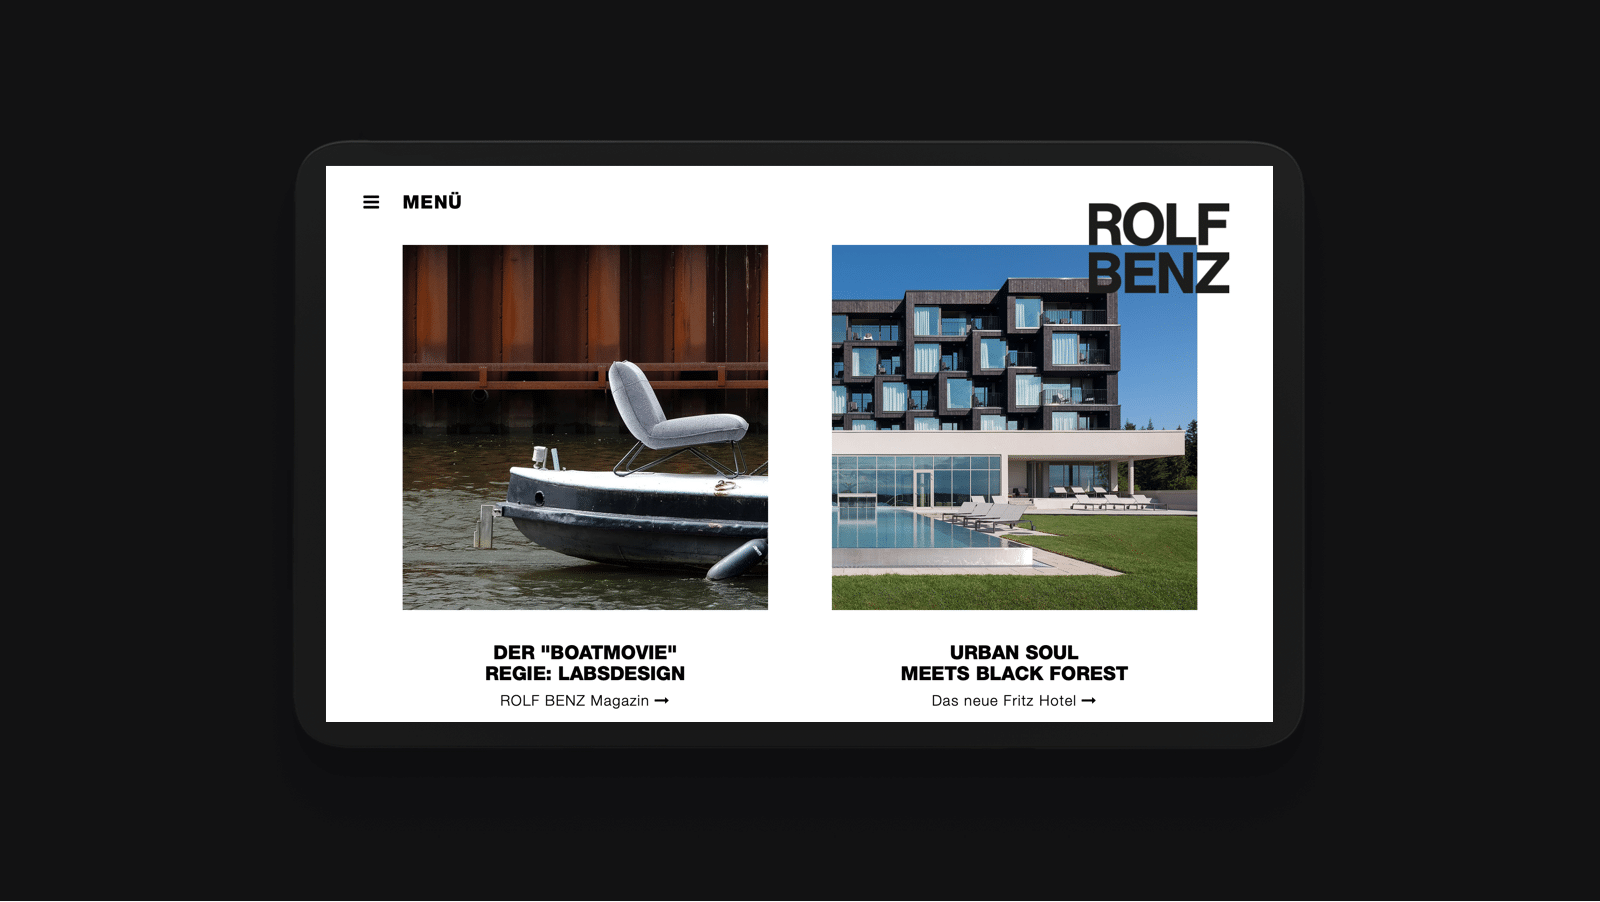 Rolf Benz Mockup as part of the digital brand presence